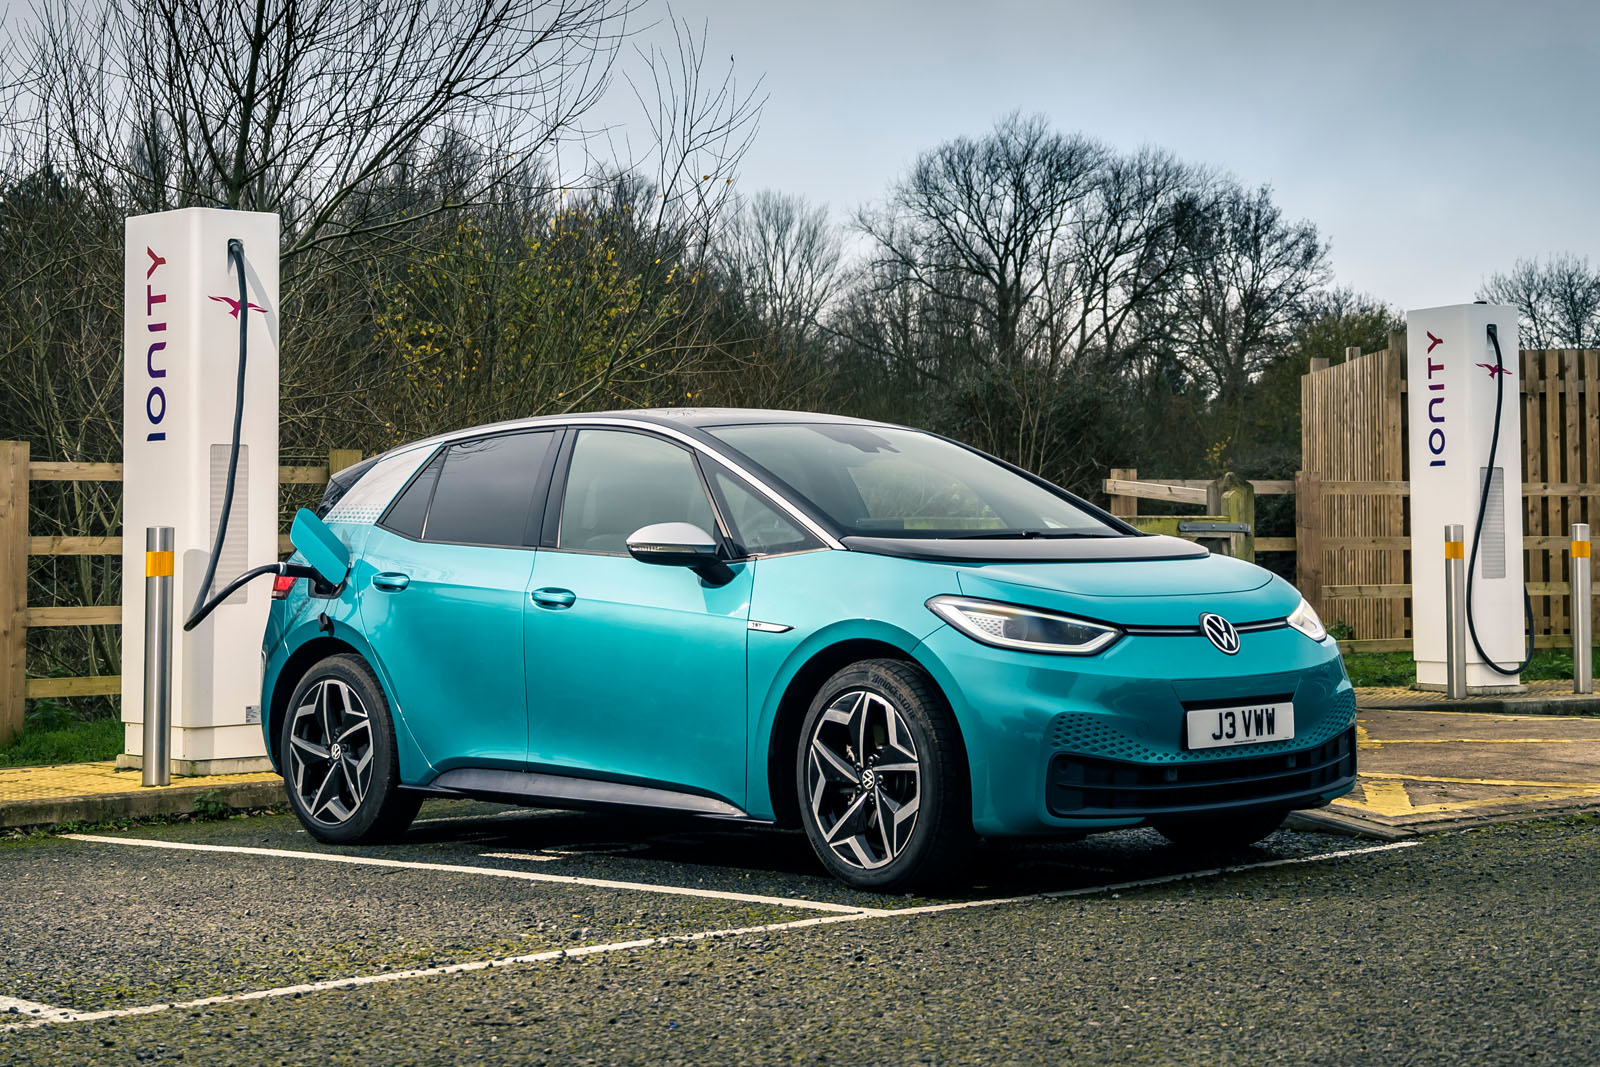 Industry calls for incentives to boost EV uptake by private buyers